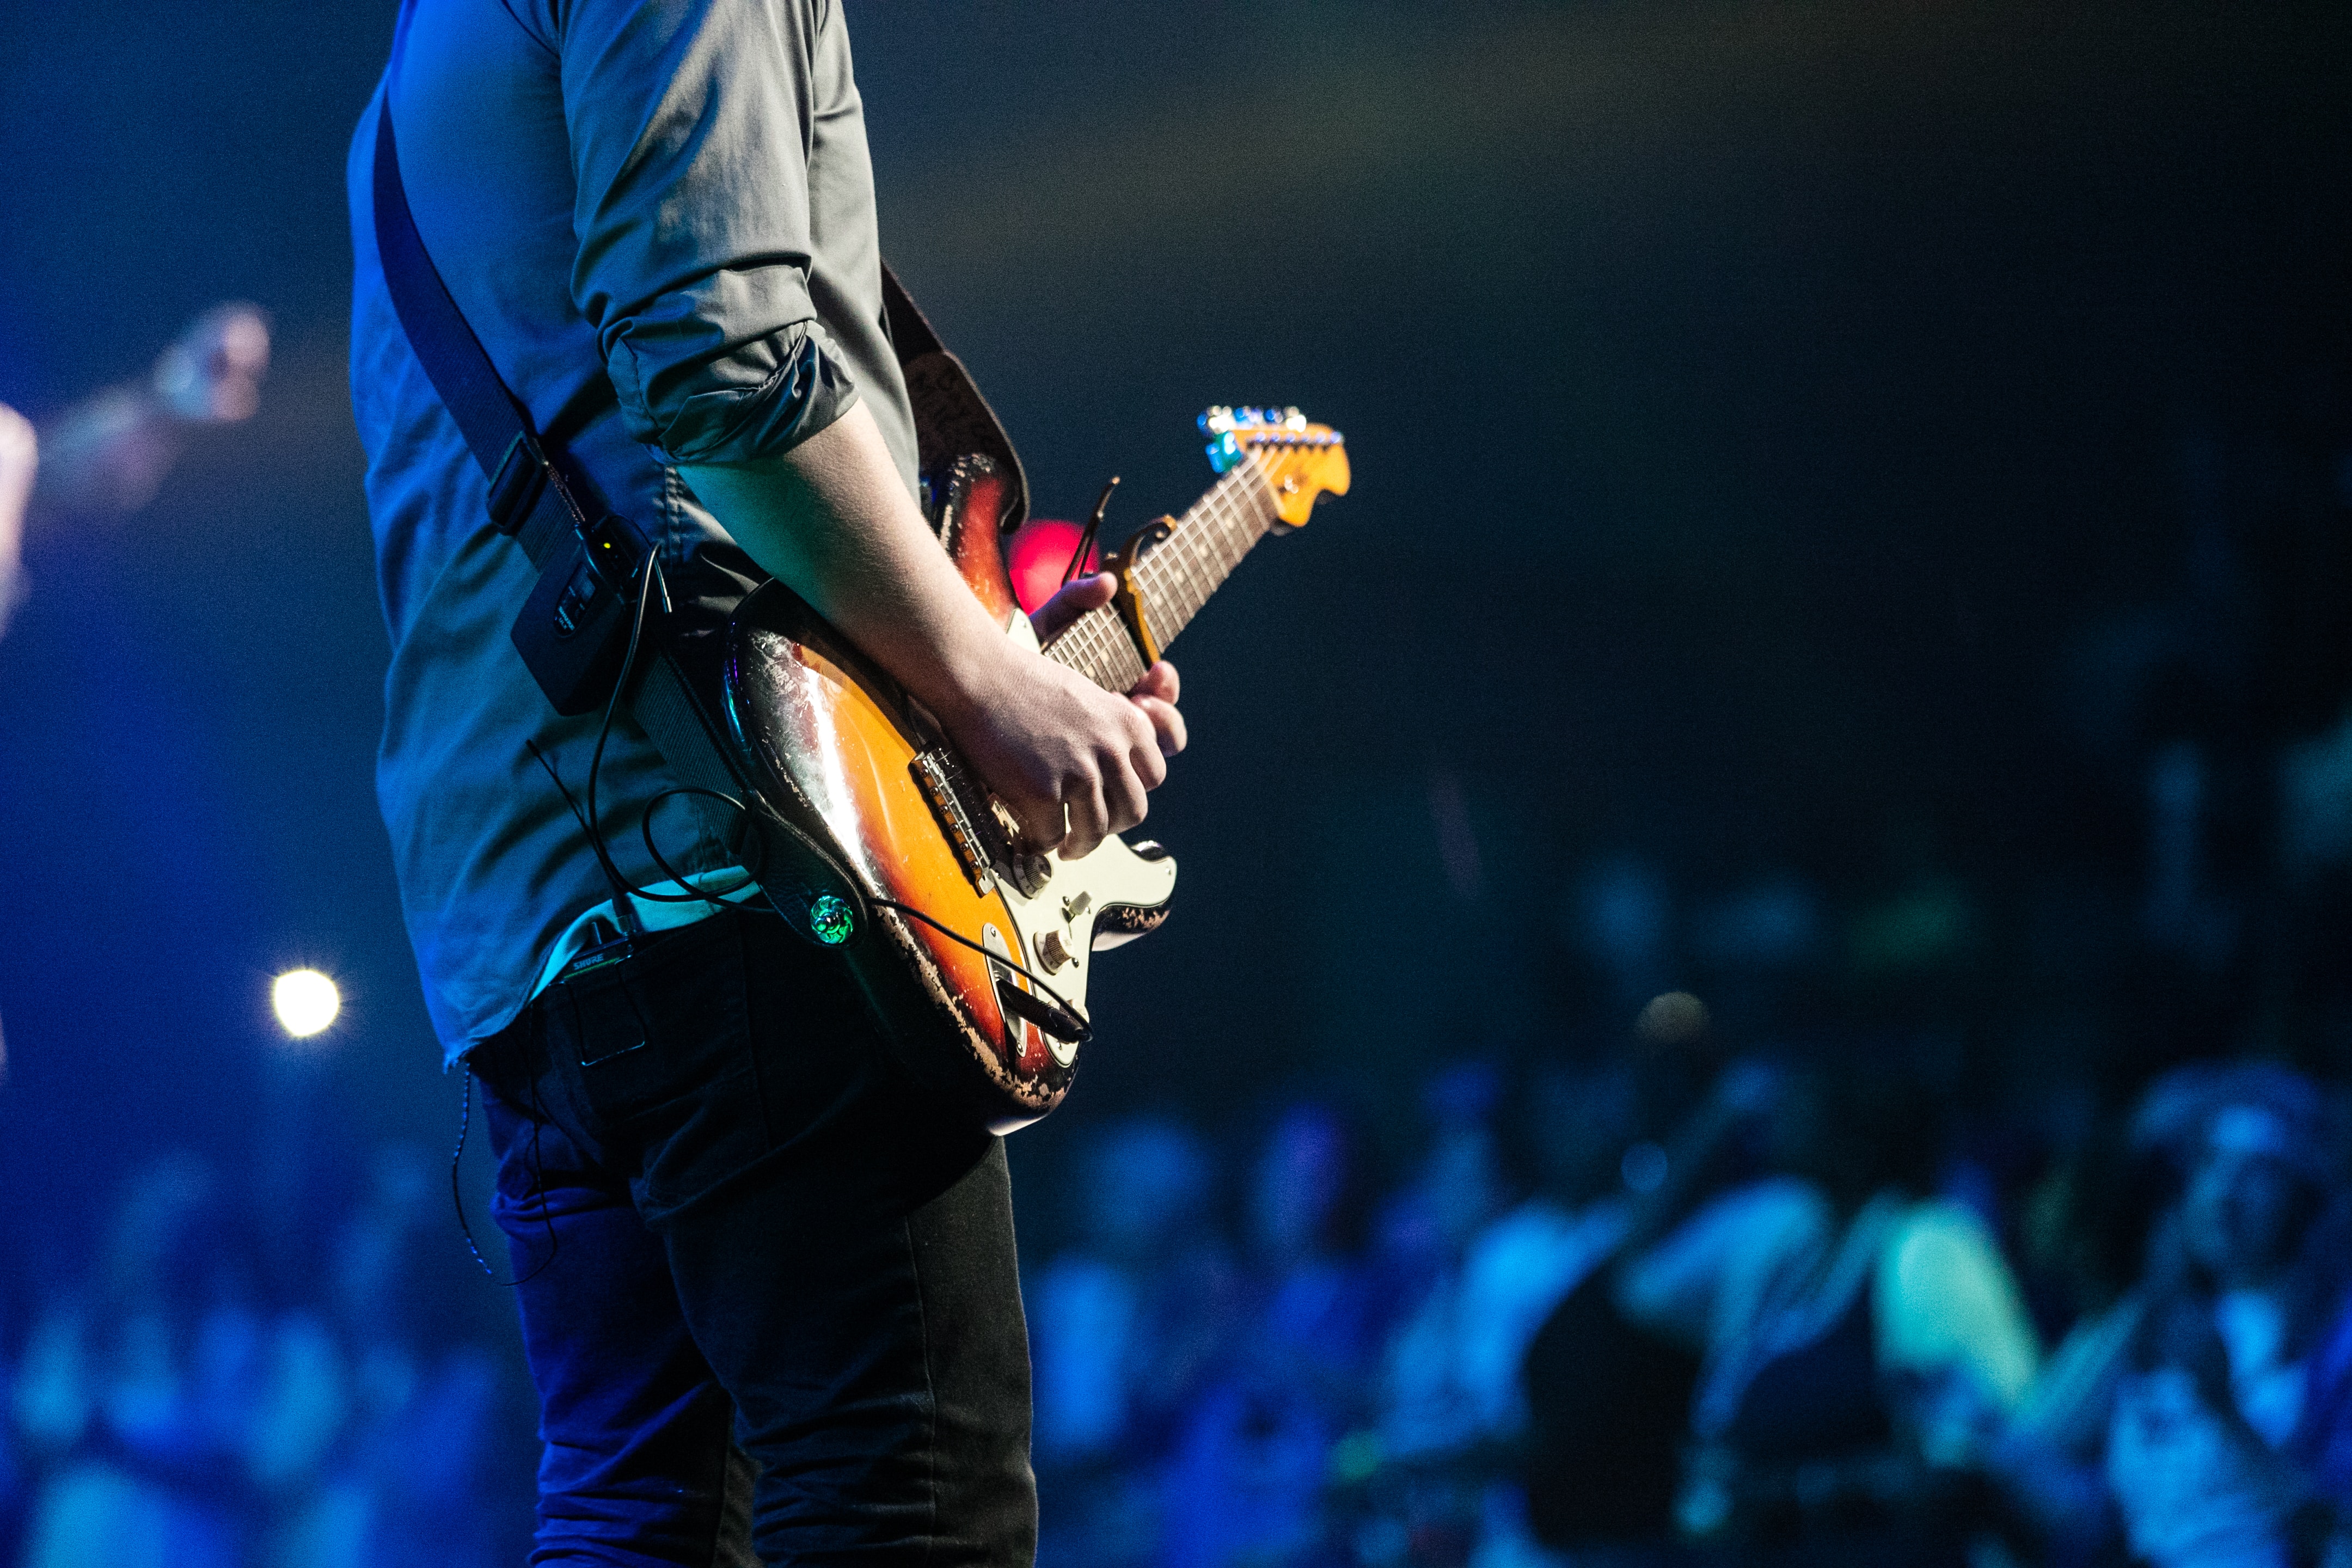 A musician playing the electric guitar in front of a large audience.